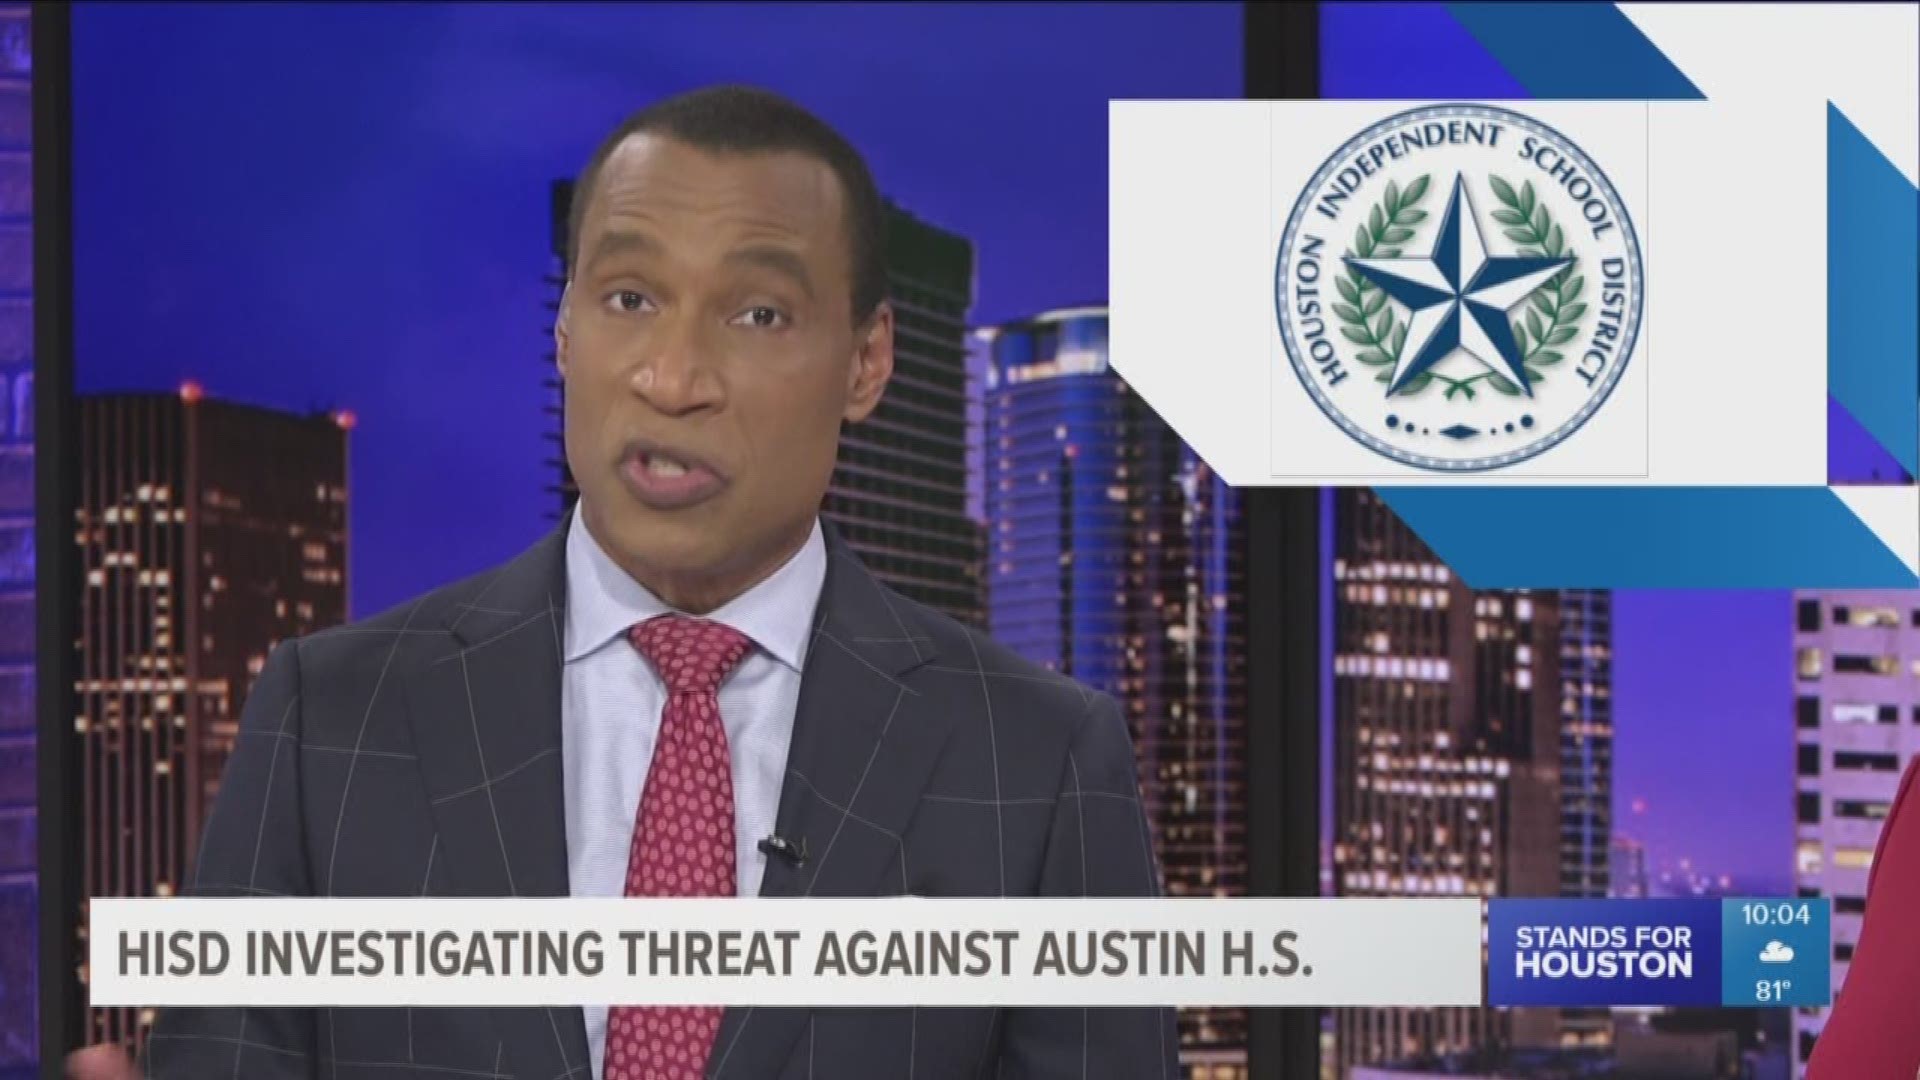 Houston ISD is investigating an alleged threat made on social media against Austin High School.